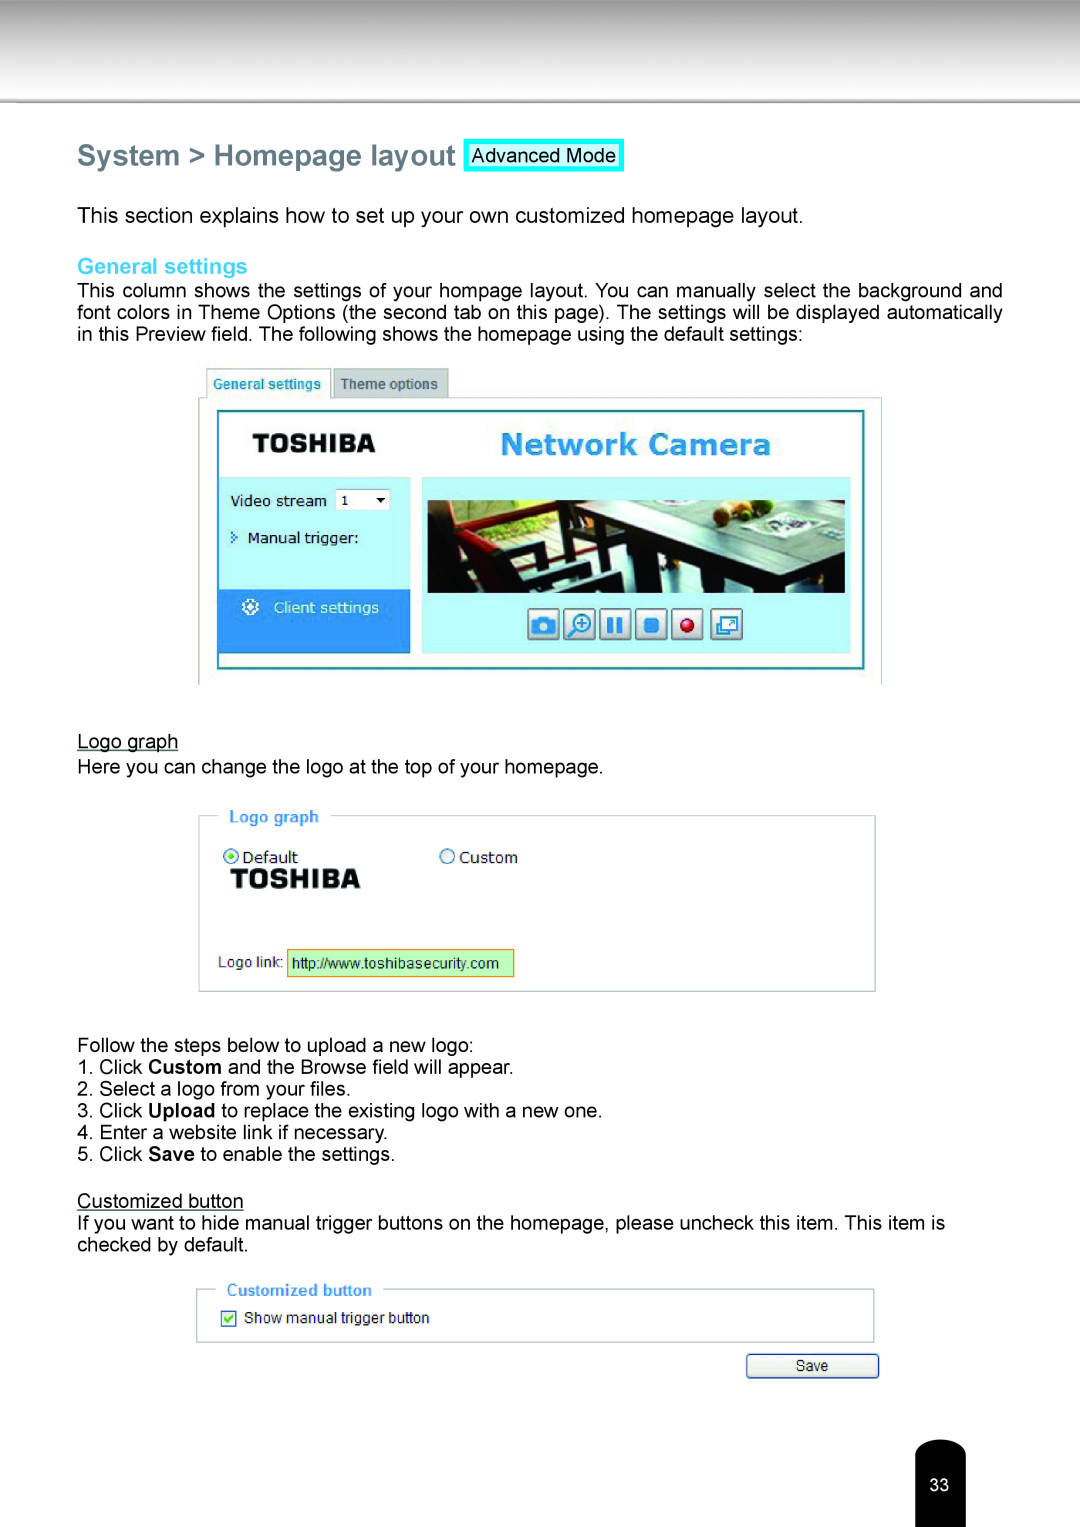 Toshiba IK-WR05A user manual System Homepage layout, General settings 